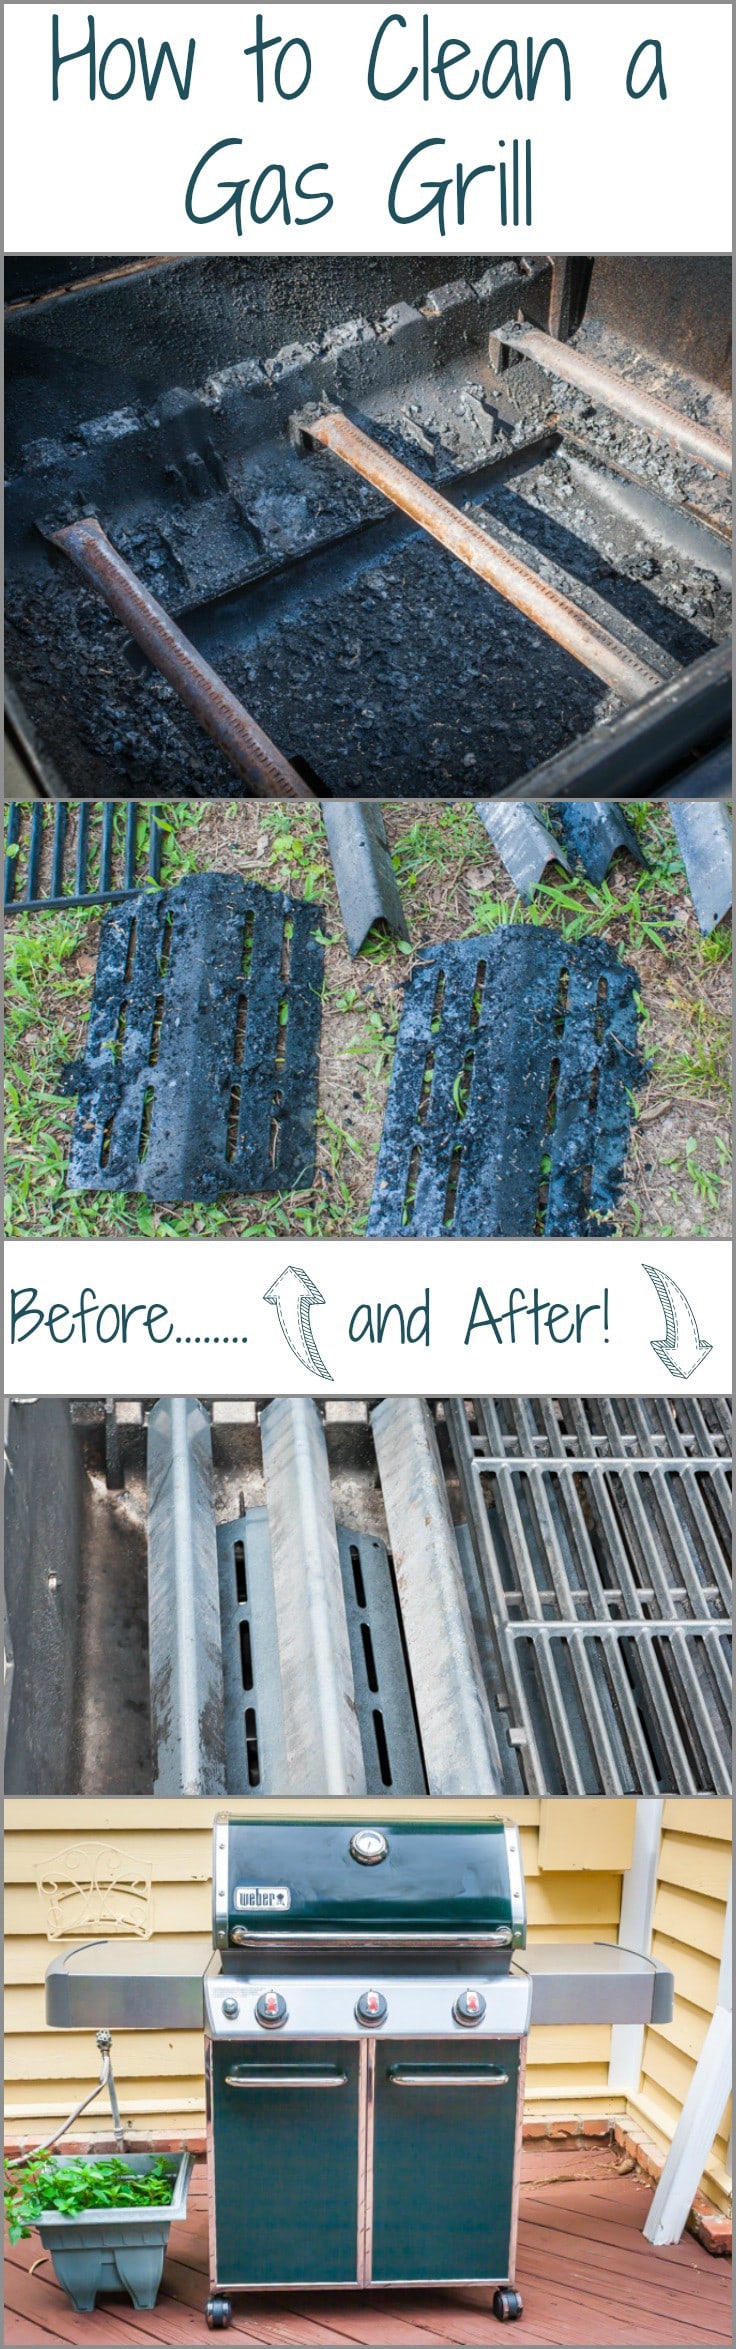 How to clean a Gas Grill! It's so important that you properly clean your gas grill if you want great tasting food! With easy step by step instructions.